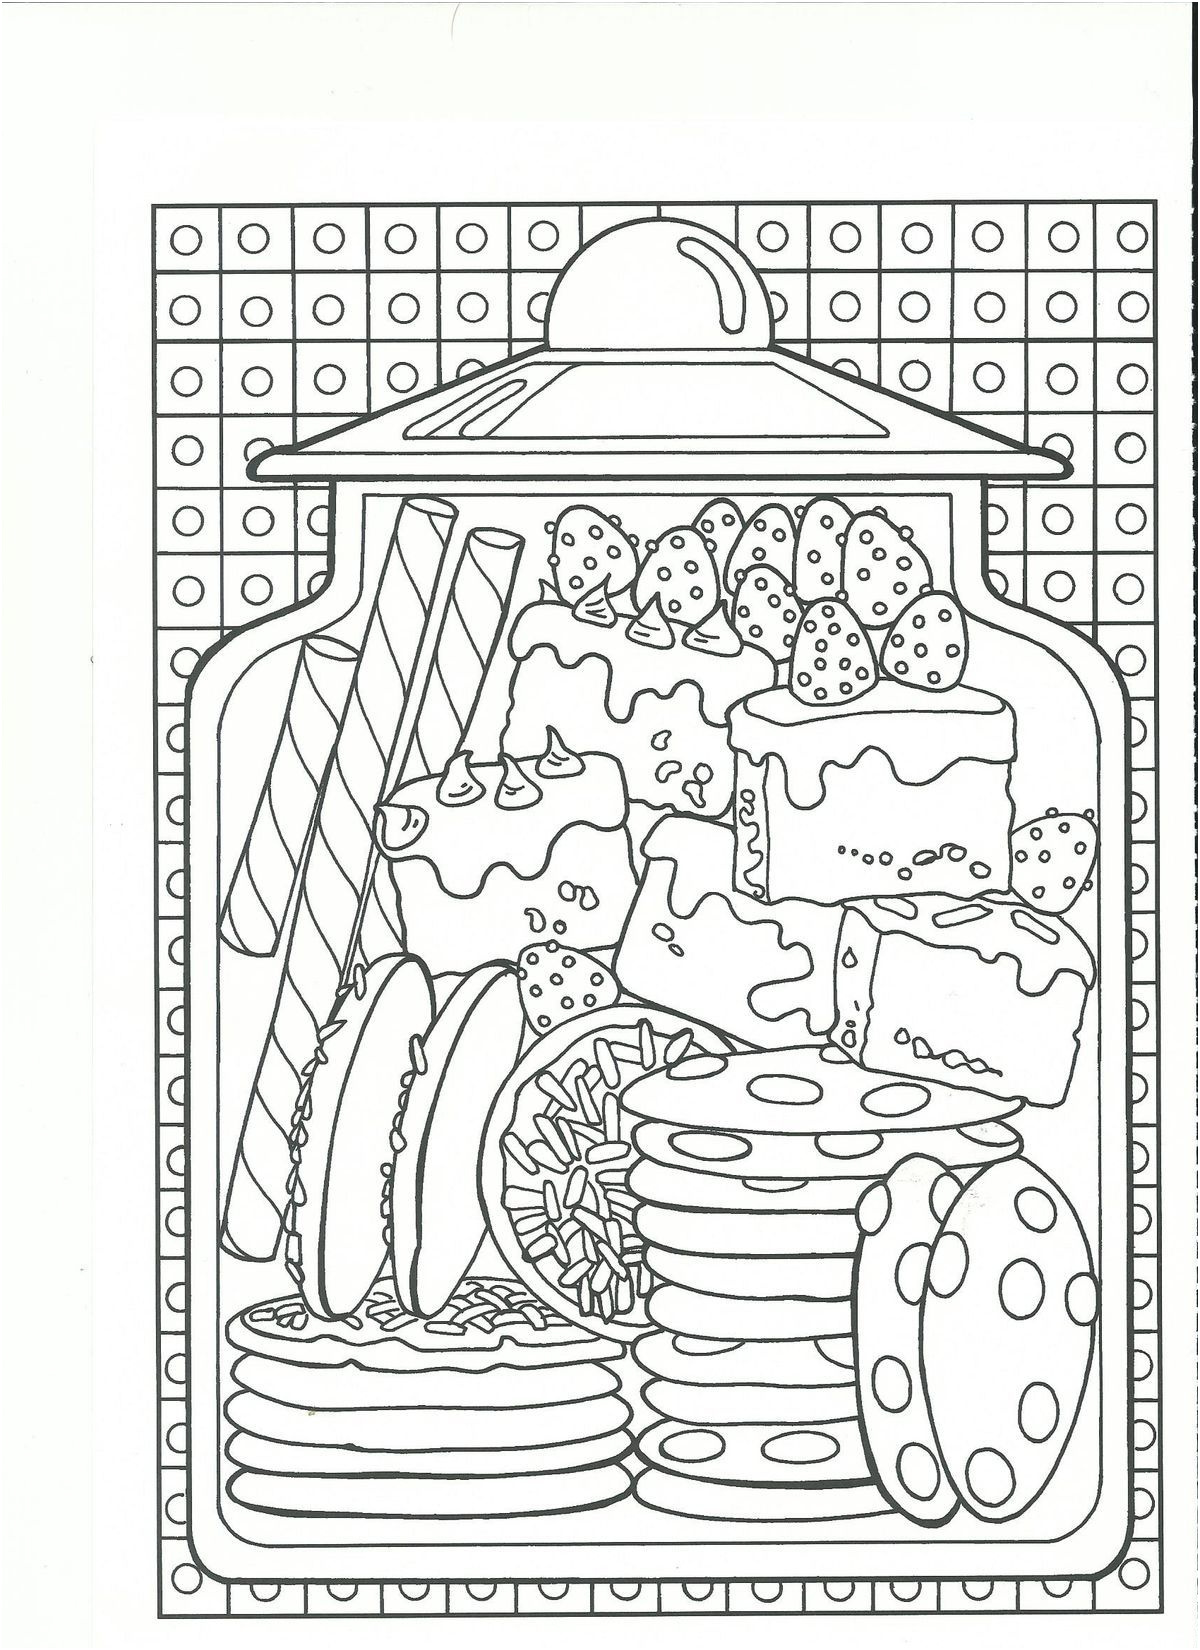 printable coloring pages kitchen